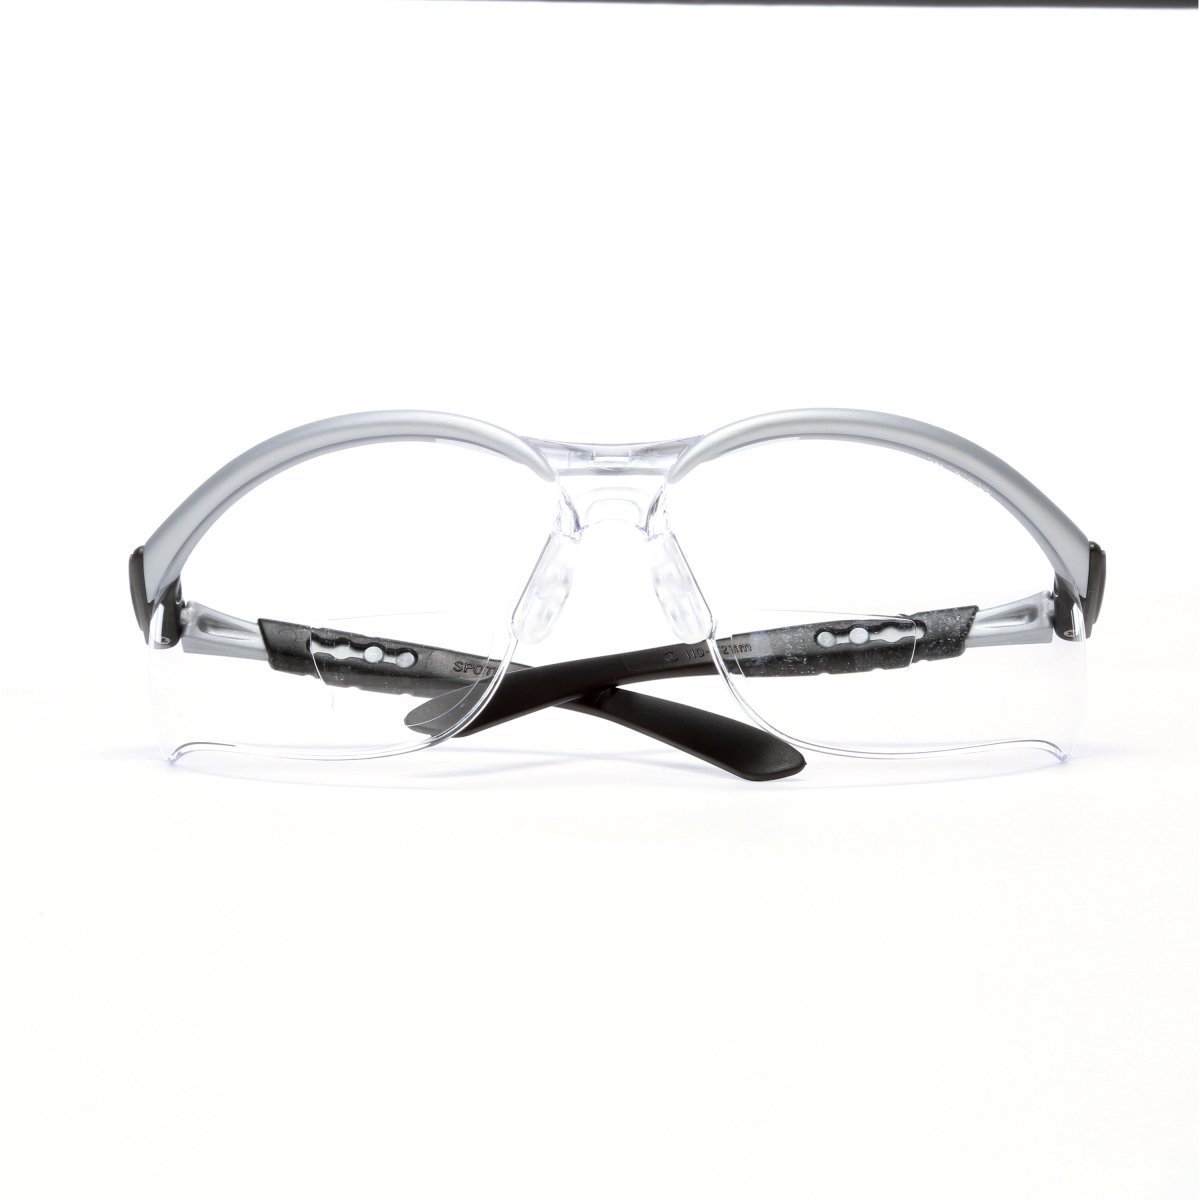 3M™ BX™ Reader Protective Eyewear 11376-00000-20, Clear Lens, Silver Frame, +2.5 Diopter (Availability restrictions apply.)